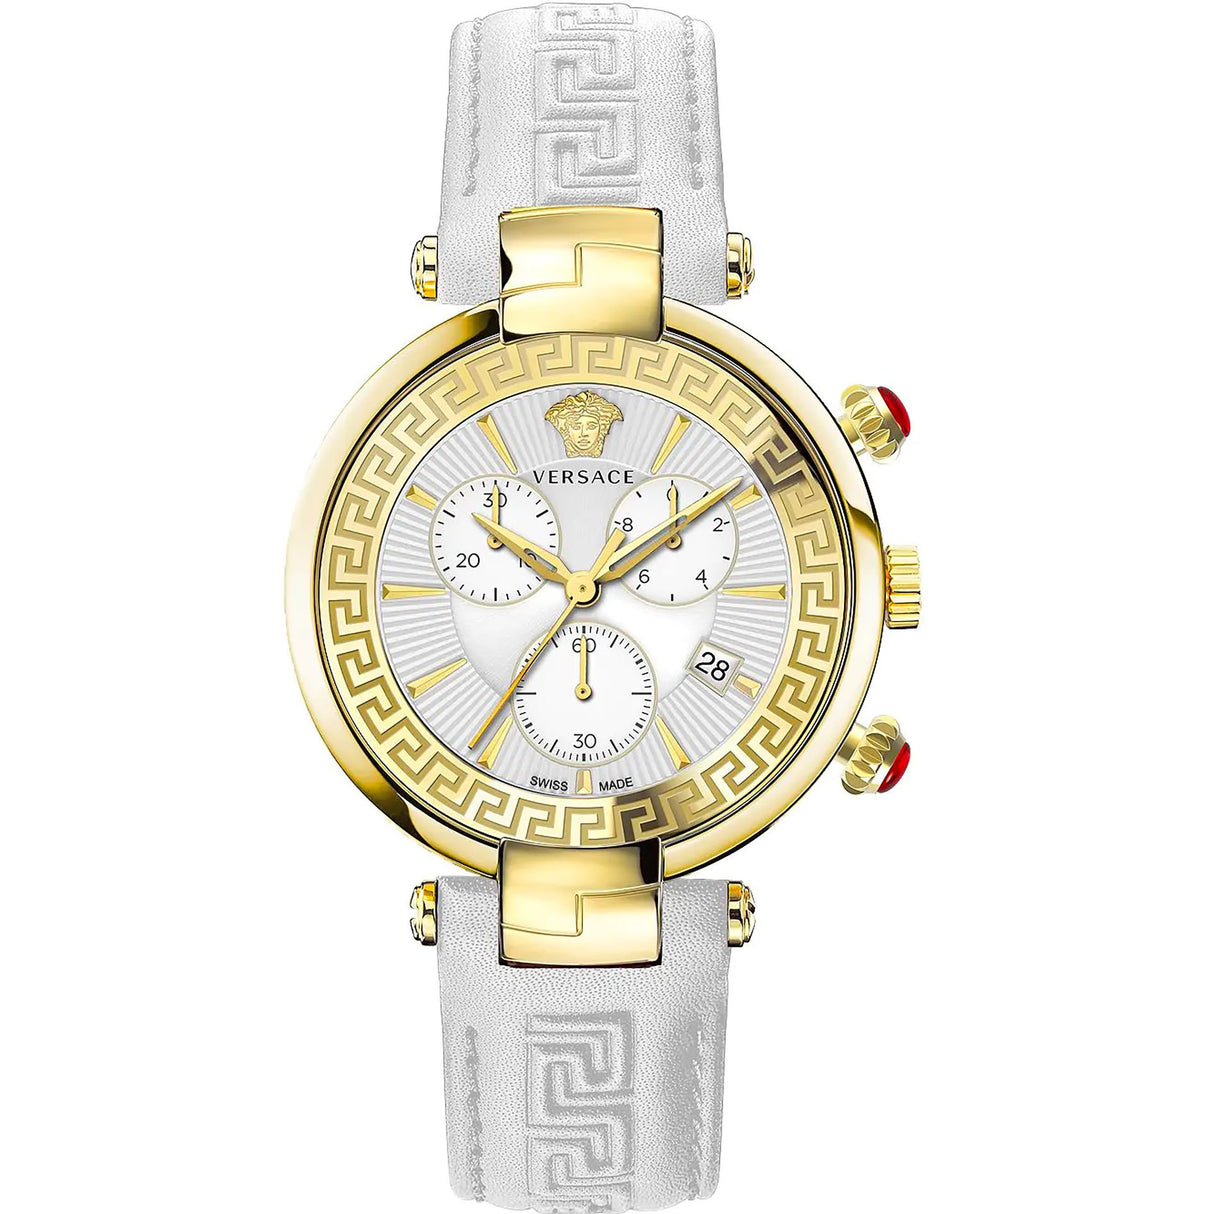 Luxury Versace Watches Versace Iconic Watches Versace High-End Timepieces Versace Designer Watch Collection Versace Fashion Watches for Men Versace Glamour Women's Watches Versace Swiss-Made Watches Versace Chronograph Watches Versace Medusa Head Watches Versace Branded Luxury Watches Versace Prestige Watch Line Versace Elegant Watch Designs Versace Leather Strap Watches Versace Stainless Steel Watches Versace Signature Watch Models